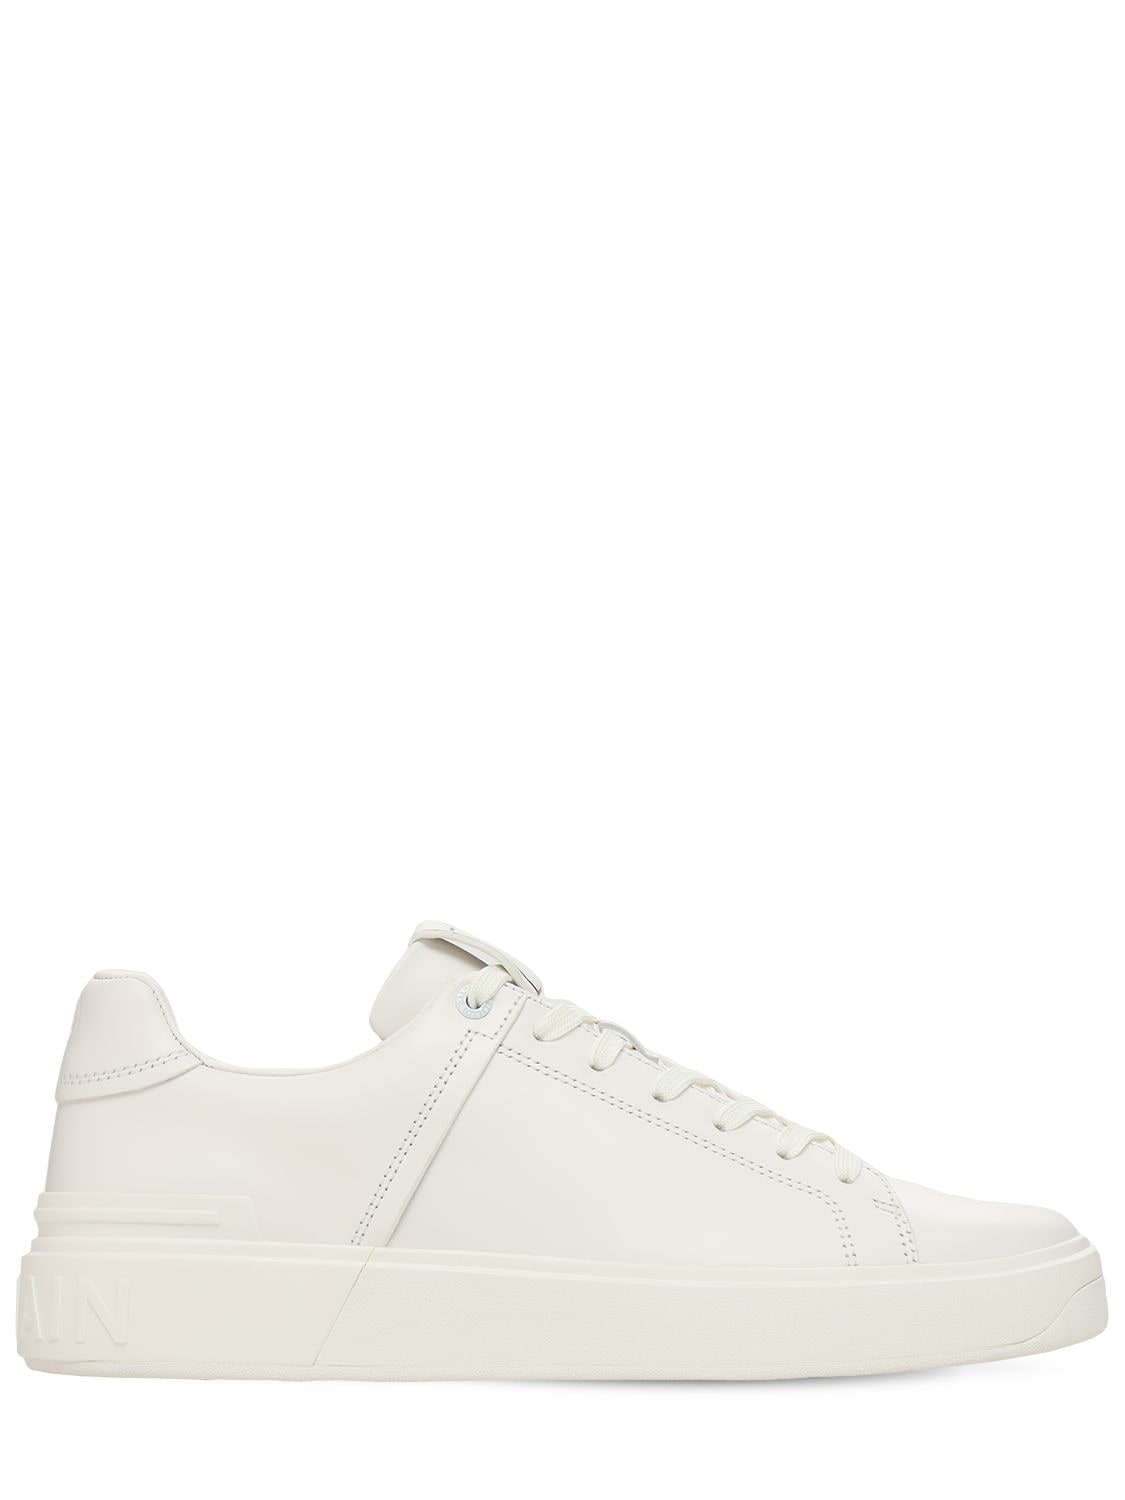 BALMAIN B COURT LEATHER LOW TOP trainers,73IS3O001-MEZB0